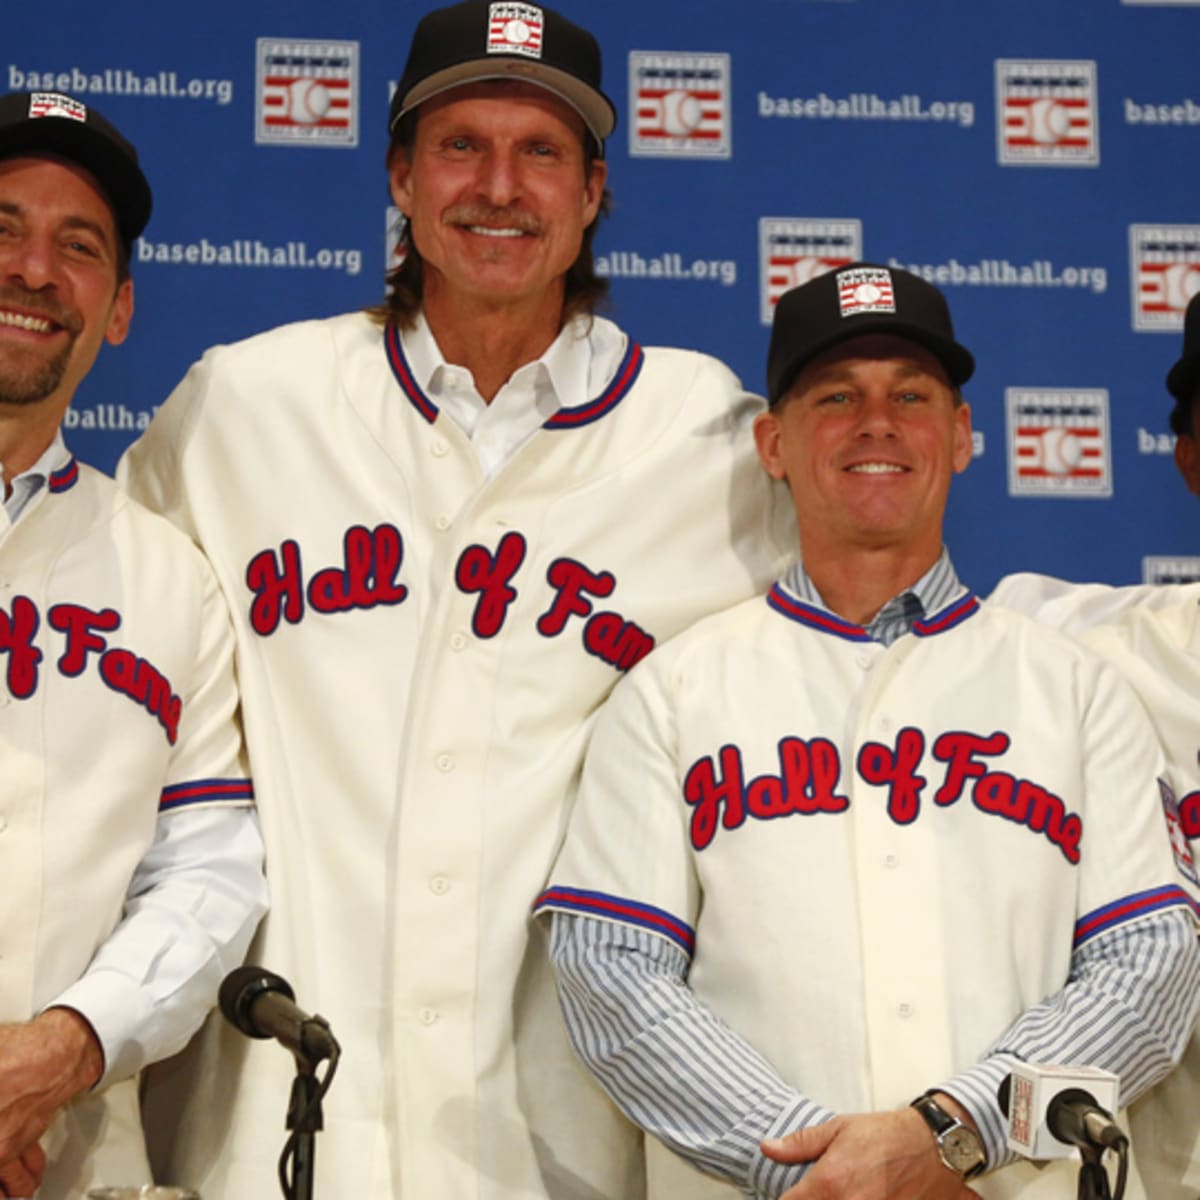 Hall of Stats: The Hall of Stats Welcomes Randy Johnson, Pedro